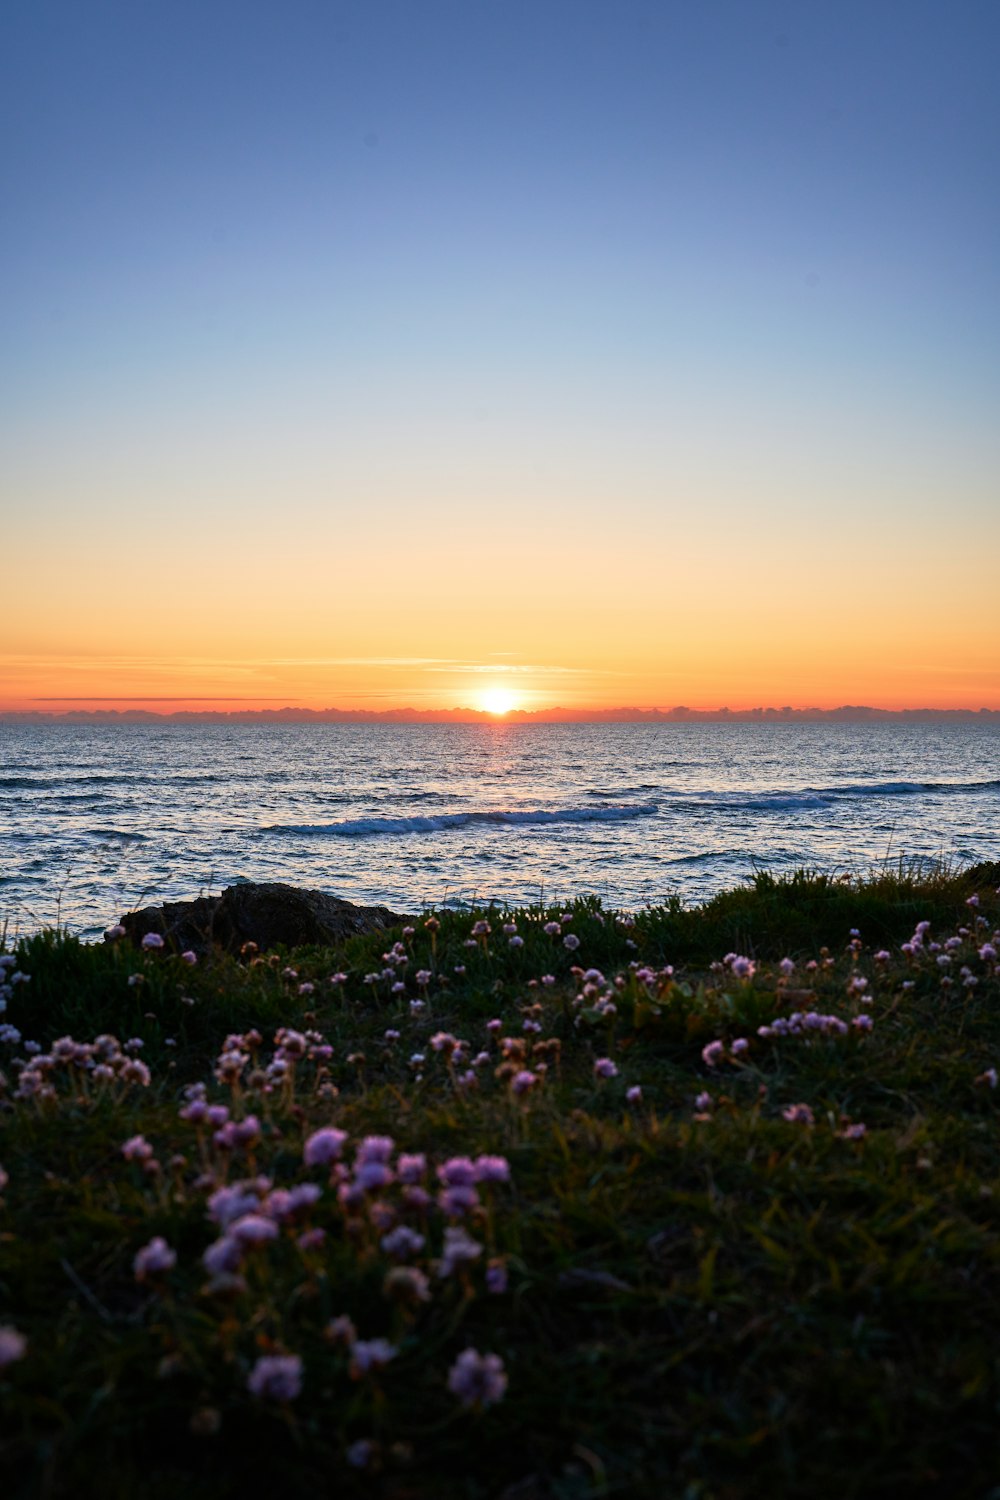 the sun is setting over the ocean with wildflowers in the foreground